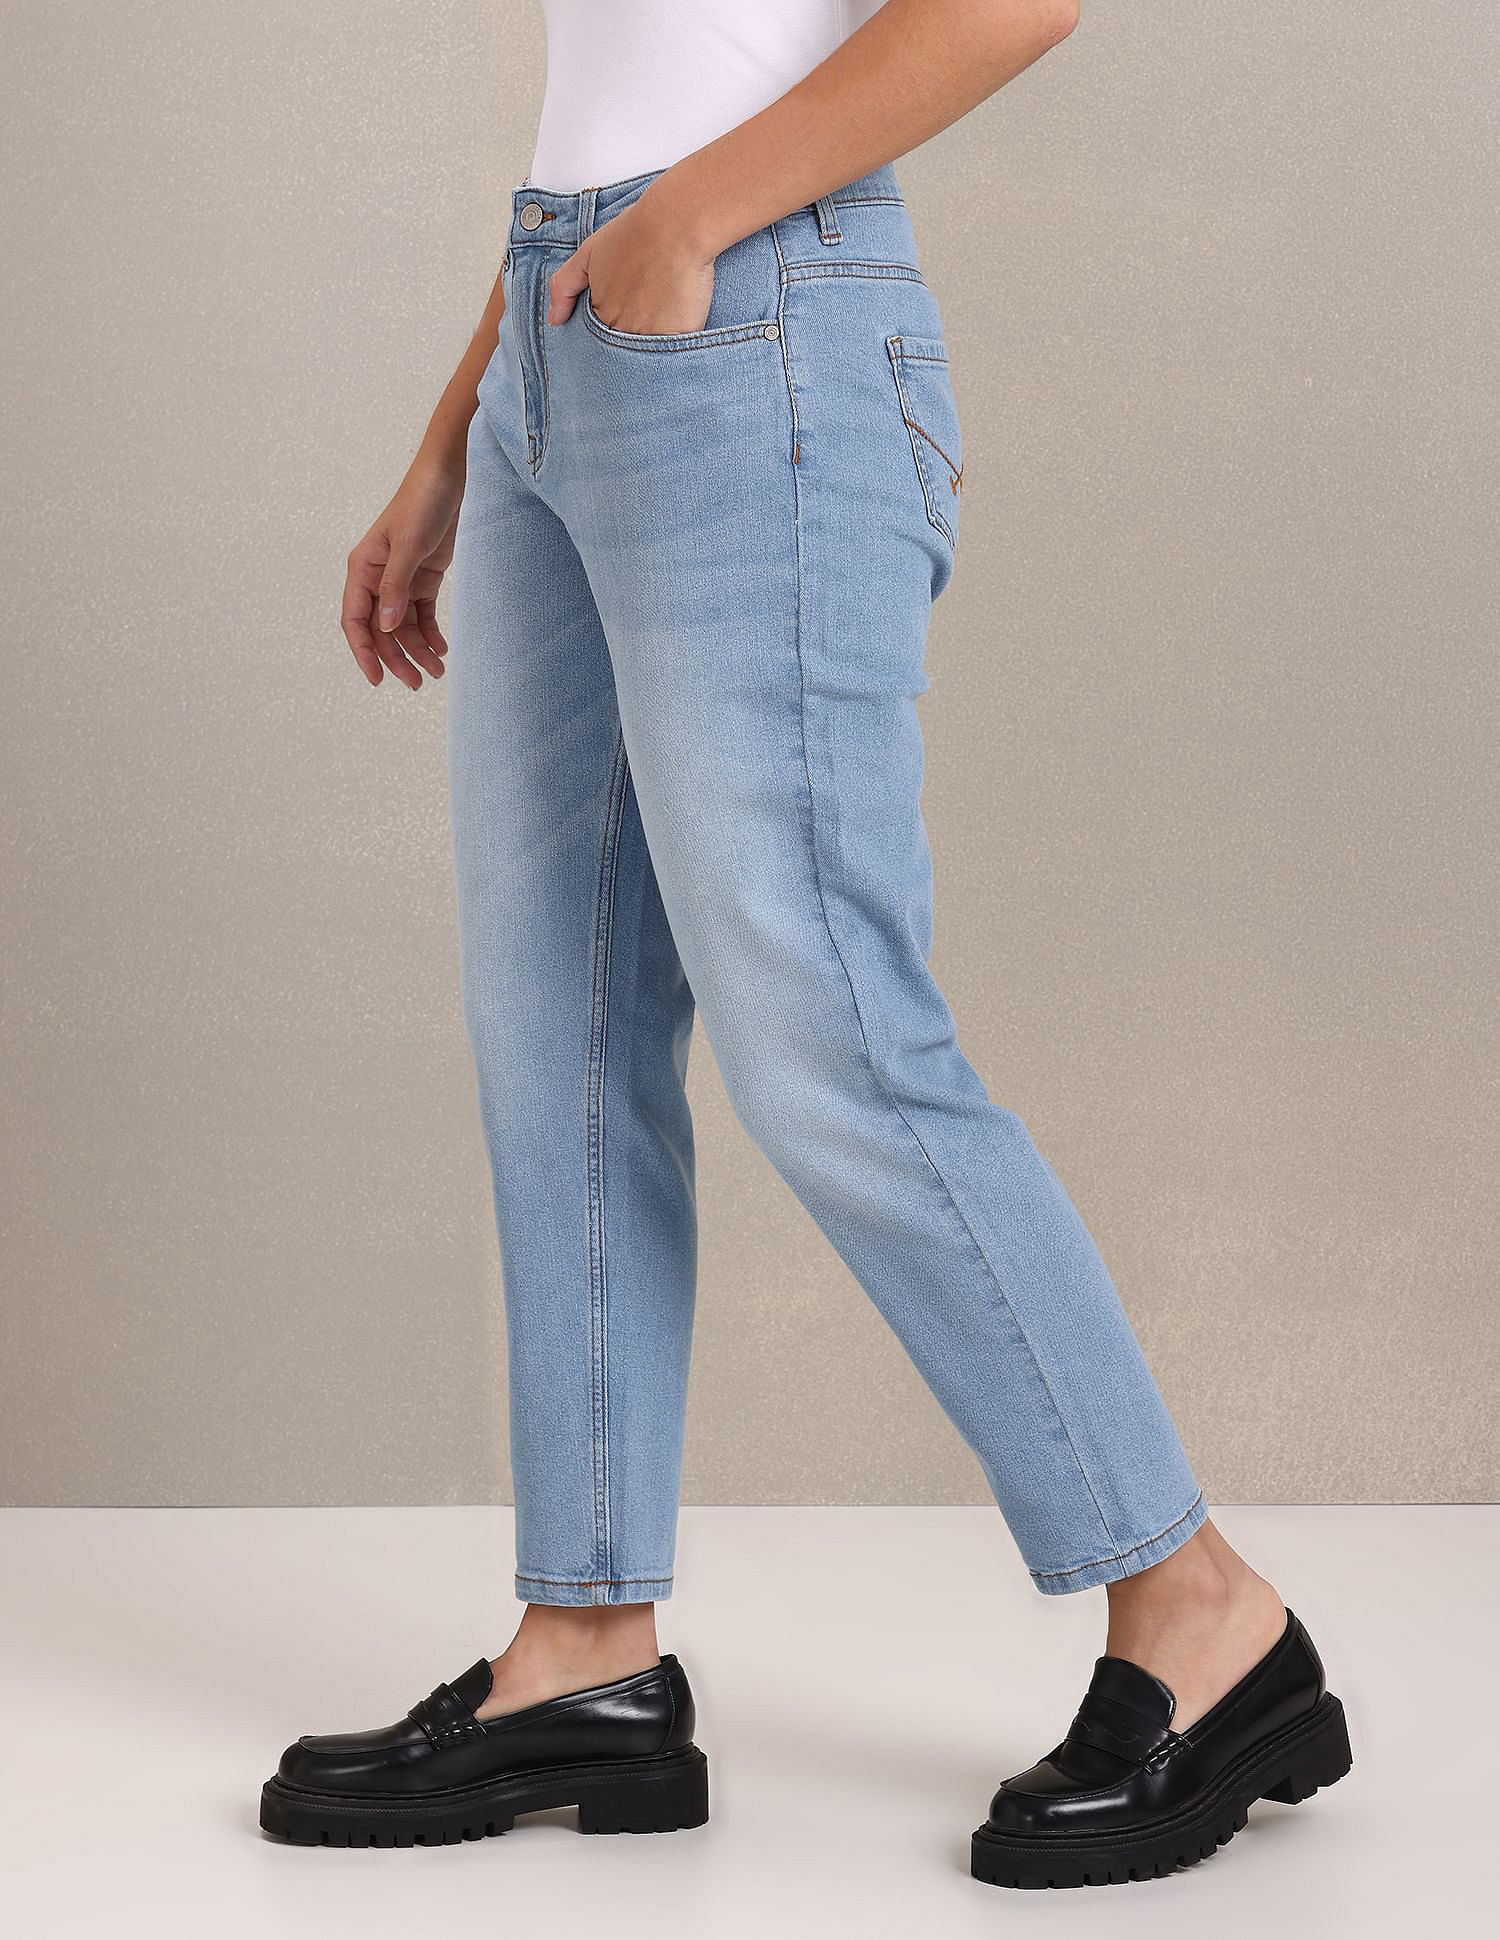 Mango mom fit jeans in washed blue